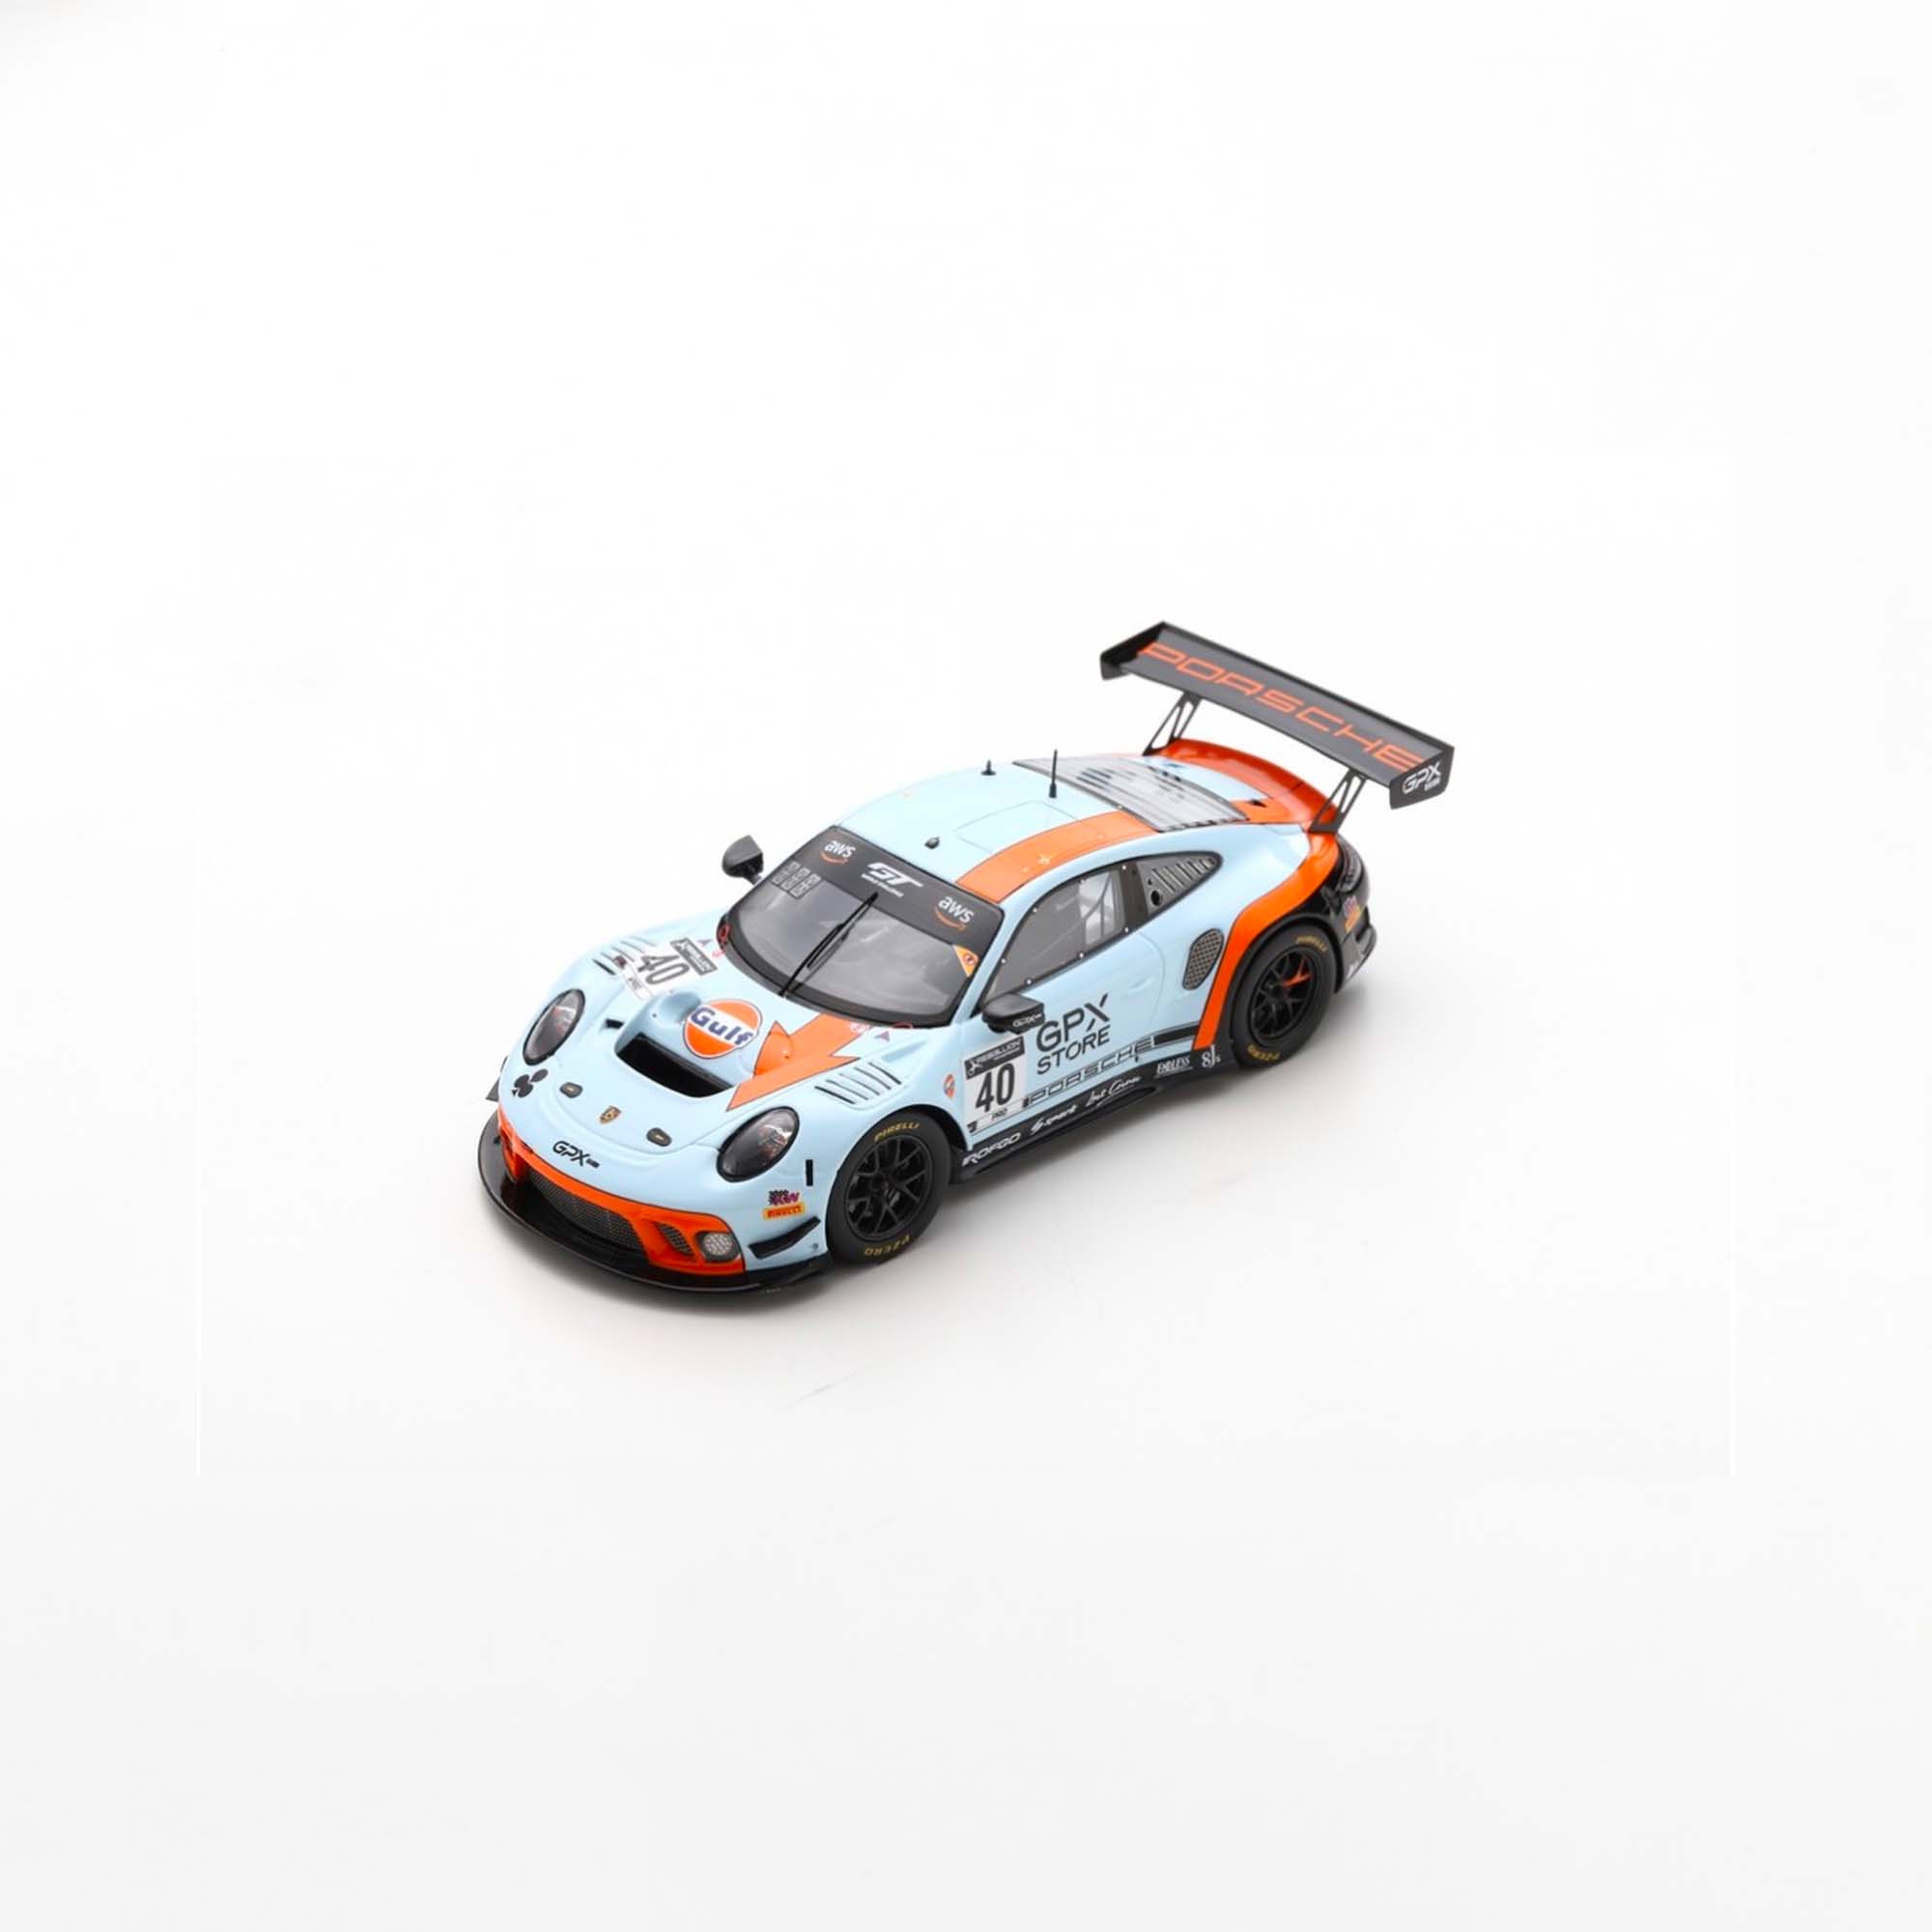 Porsche 911 GT3 R Team GPX Racing No.40 "The Club" | 1:43 Scale Model-1:43 Scale Model-Spark Models-gpx-store